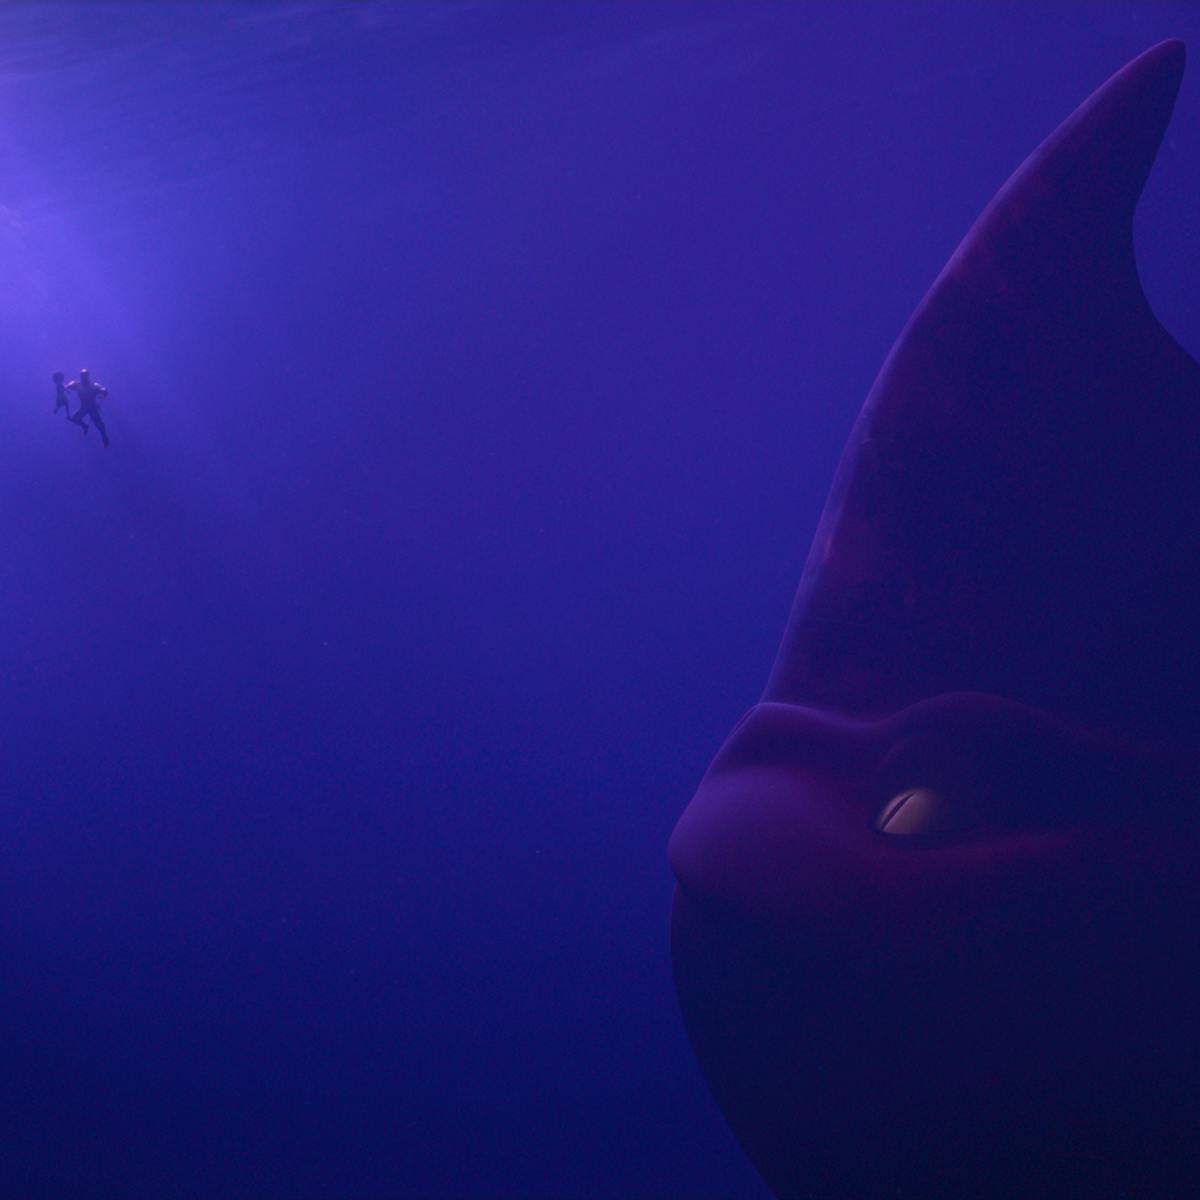 Red, Maisie, and Jacob swim underwater. The scene is purple and blue and a little bit ominous.